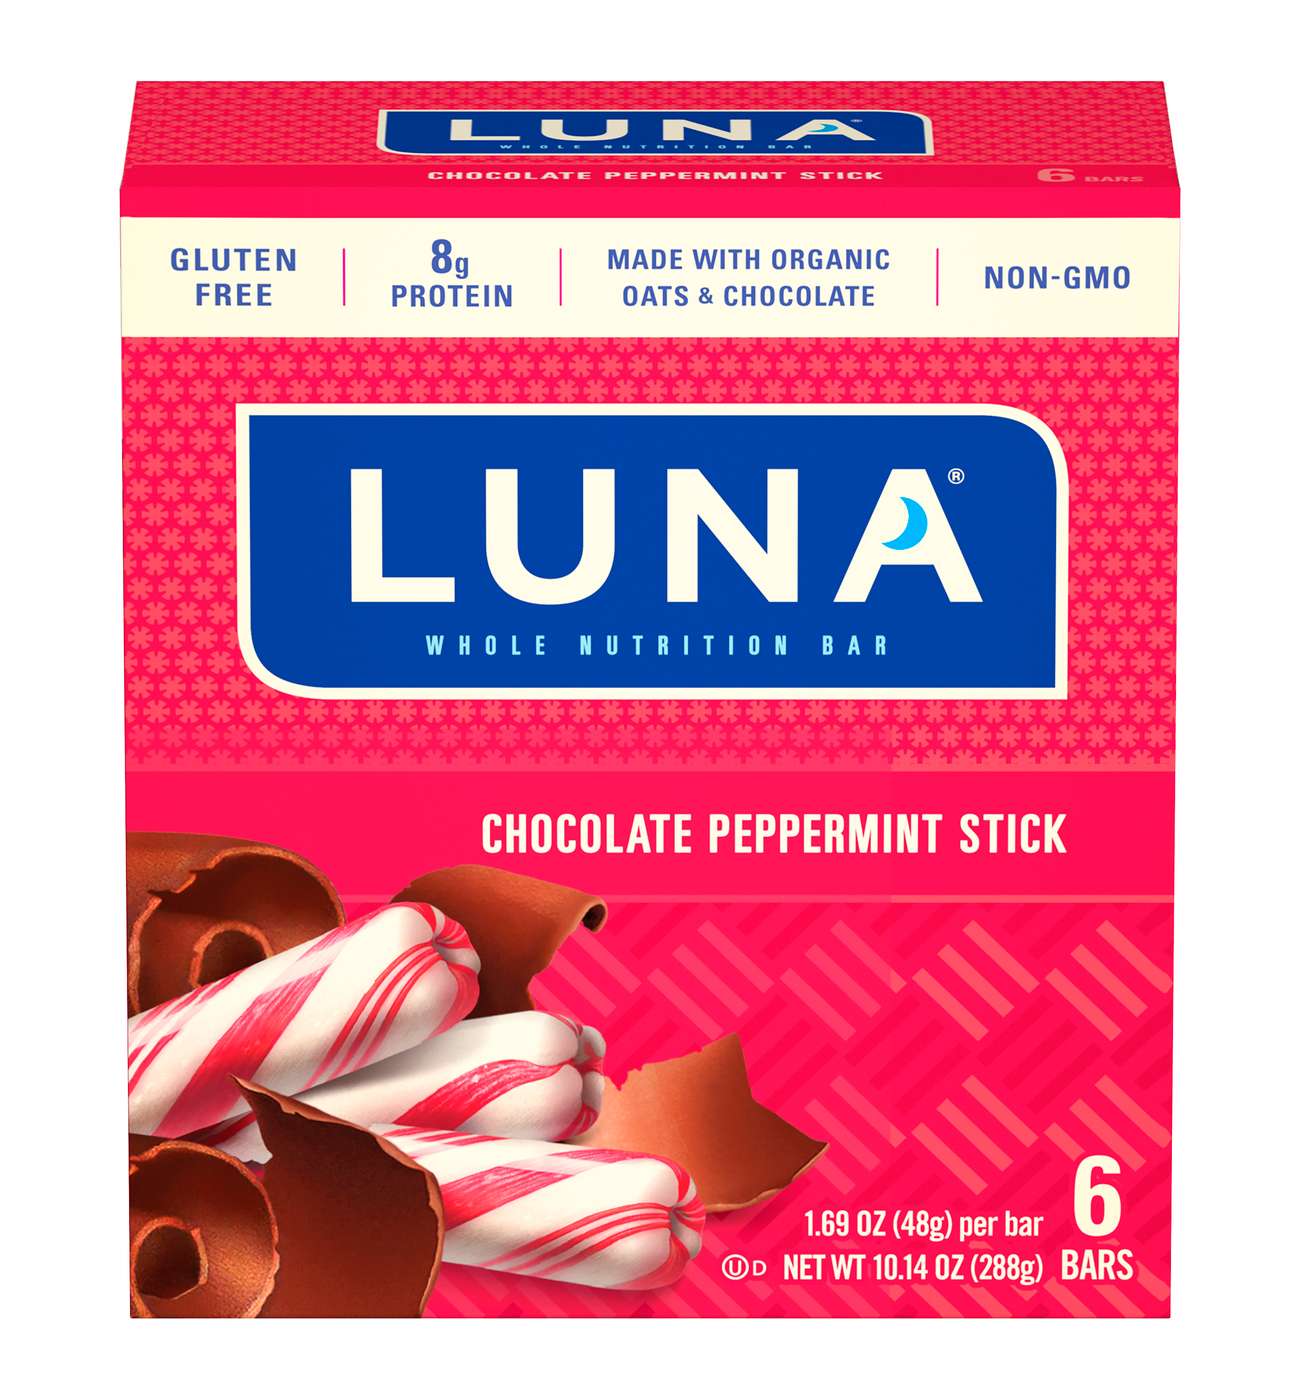 Luna 7g Protein Whole Nutrition Bars - Chocolate Peppermint Stick; image 2 of 2